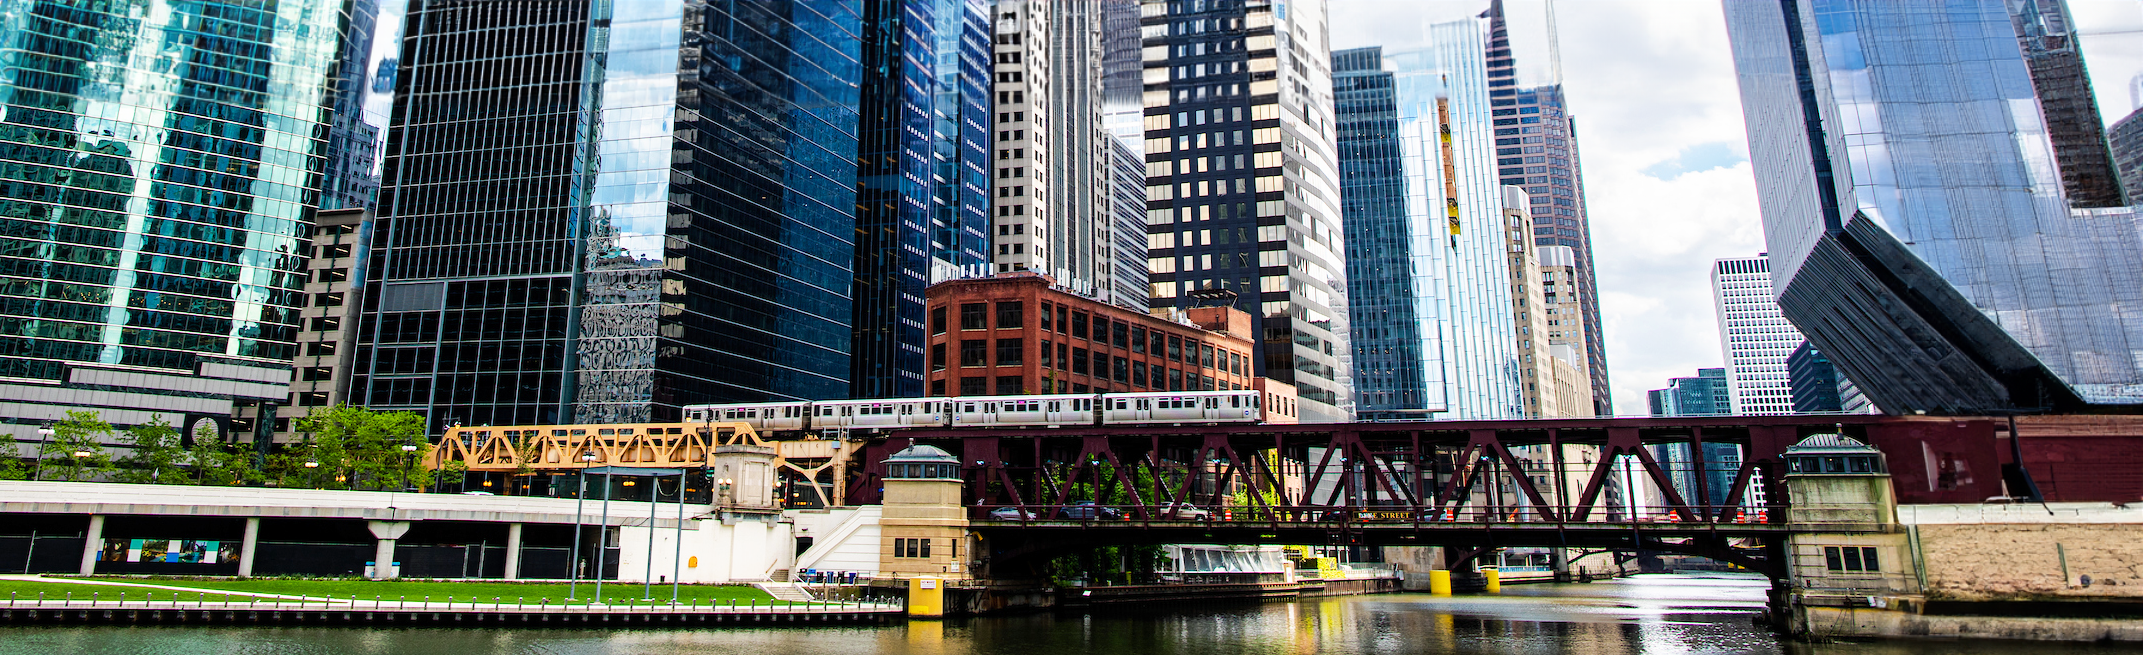 A scene of downtown Chicago, including the river, the riverwalk, the CTA train